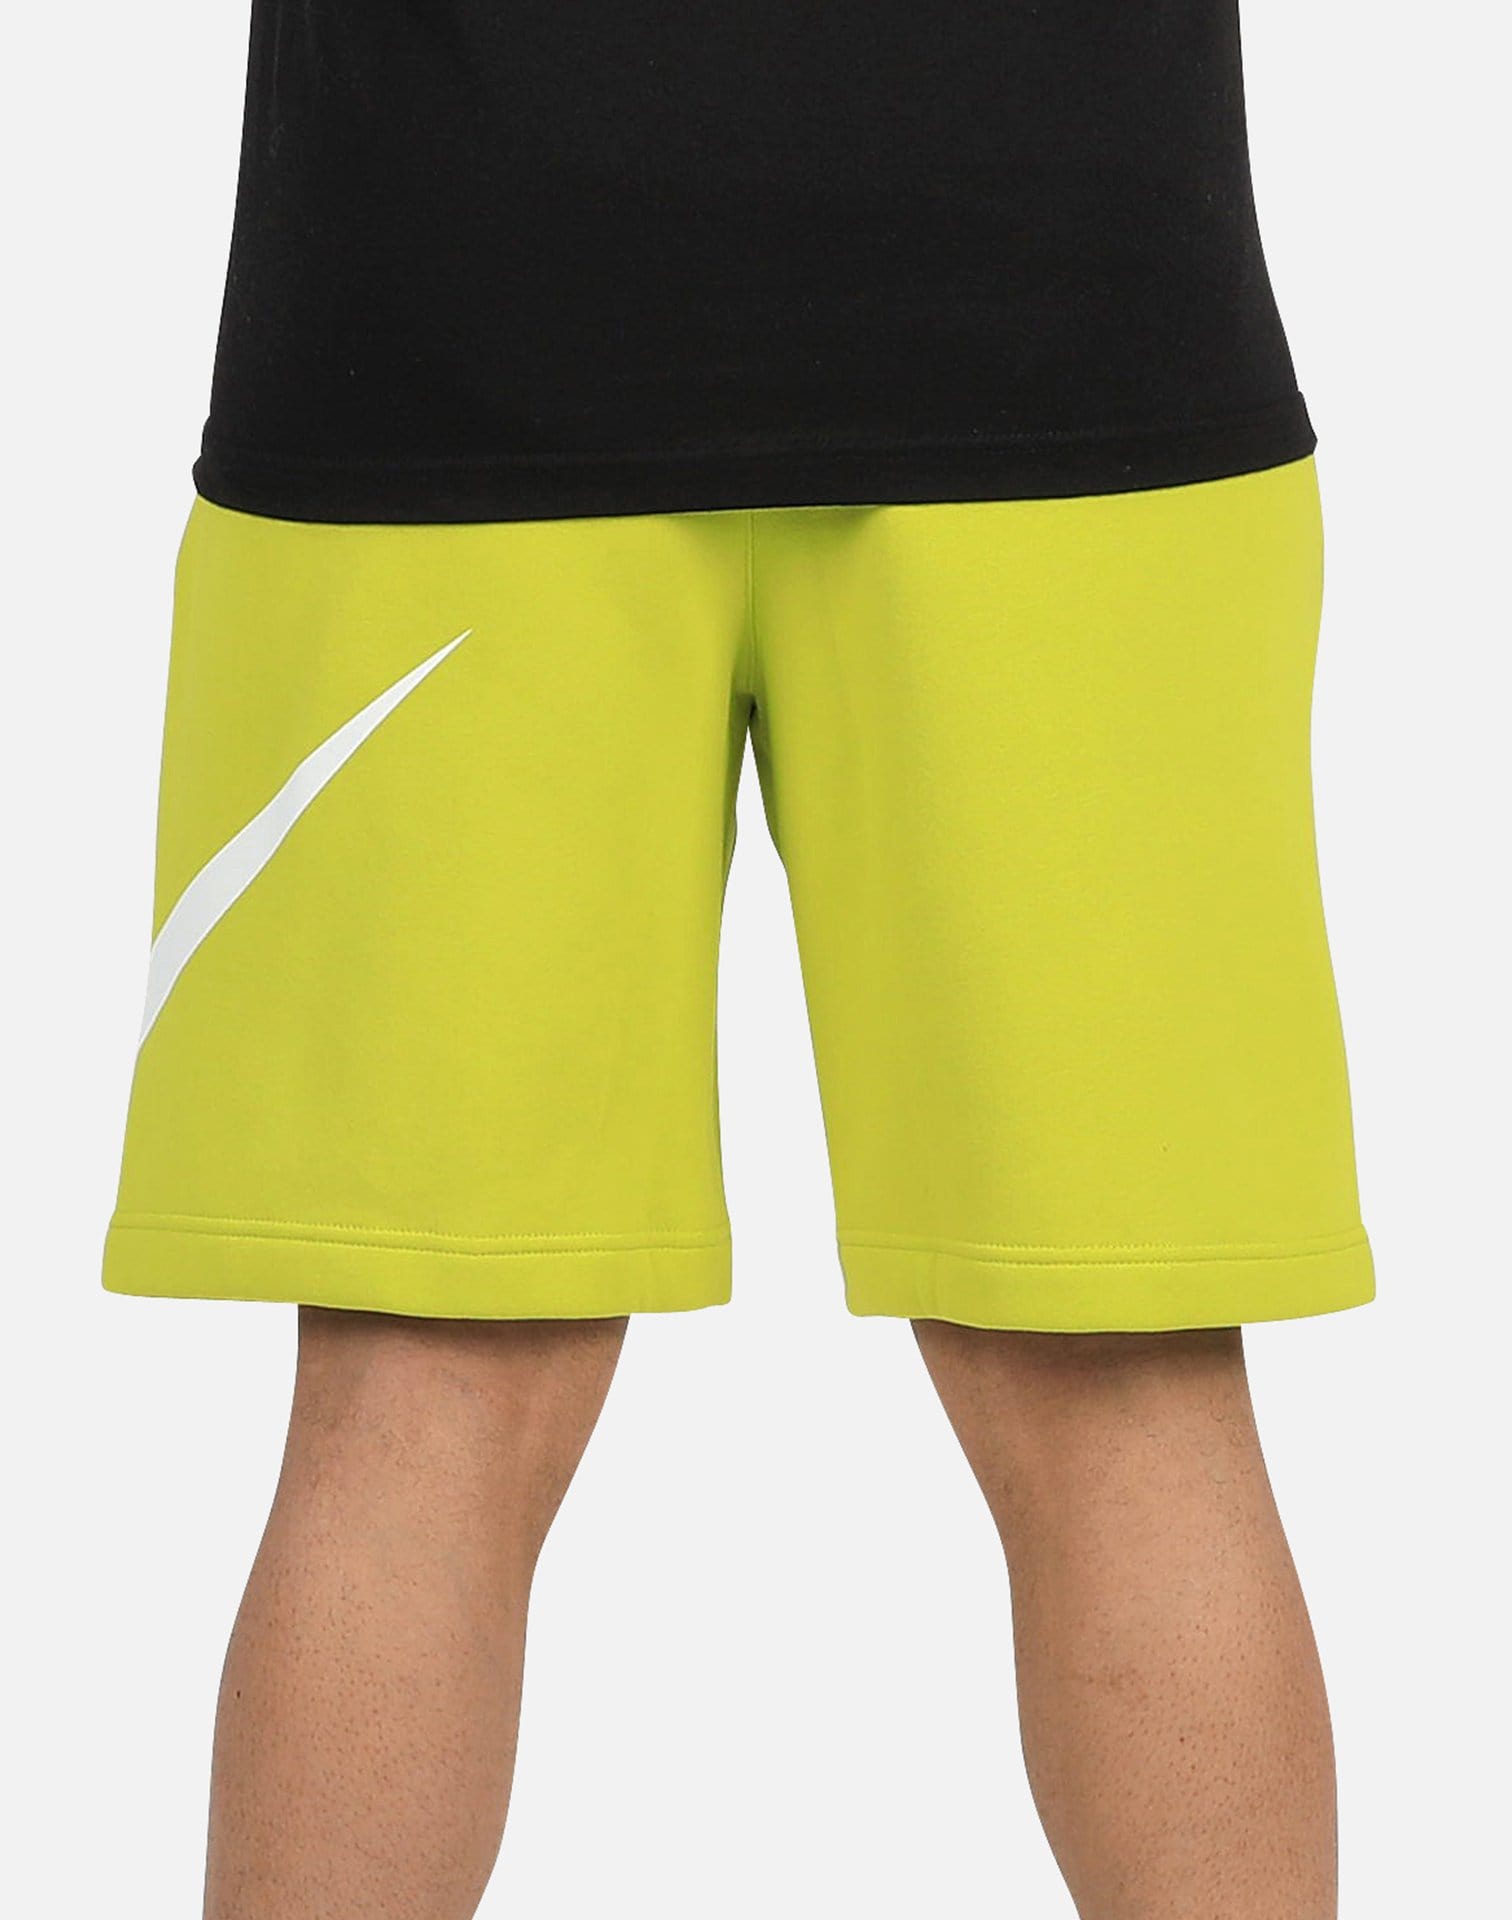 NSW CLUB GRAPHIC SHORTS – DTLR